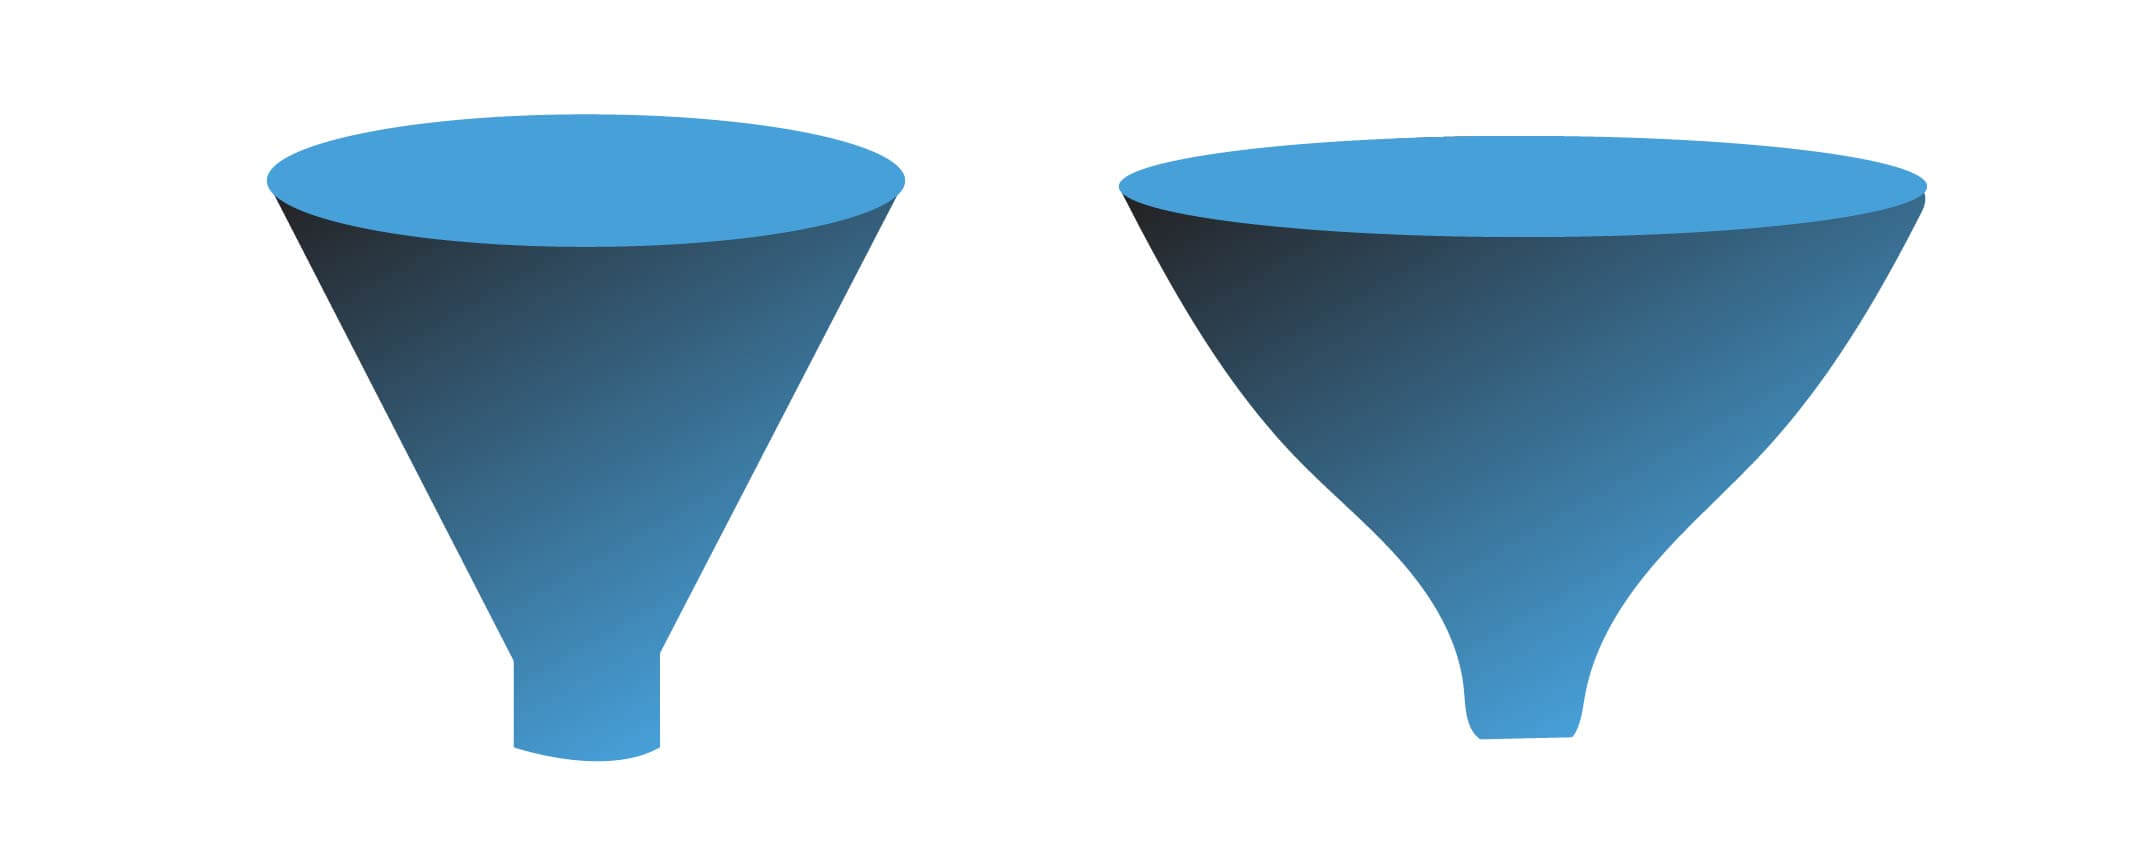 Why we suggest DV360 - Redefine the acquisition funnel